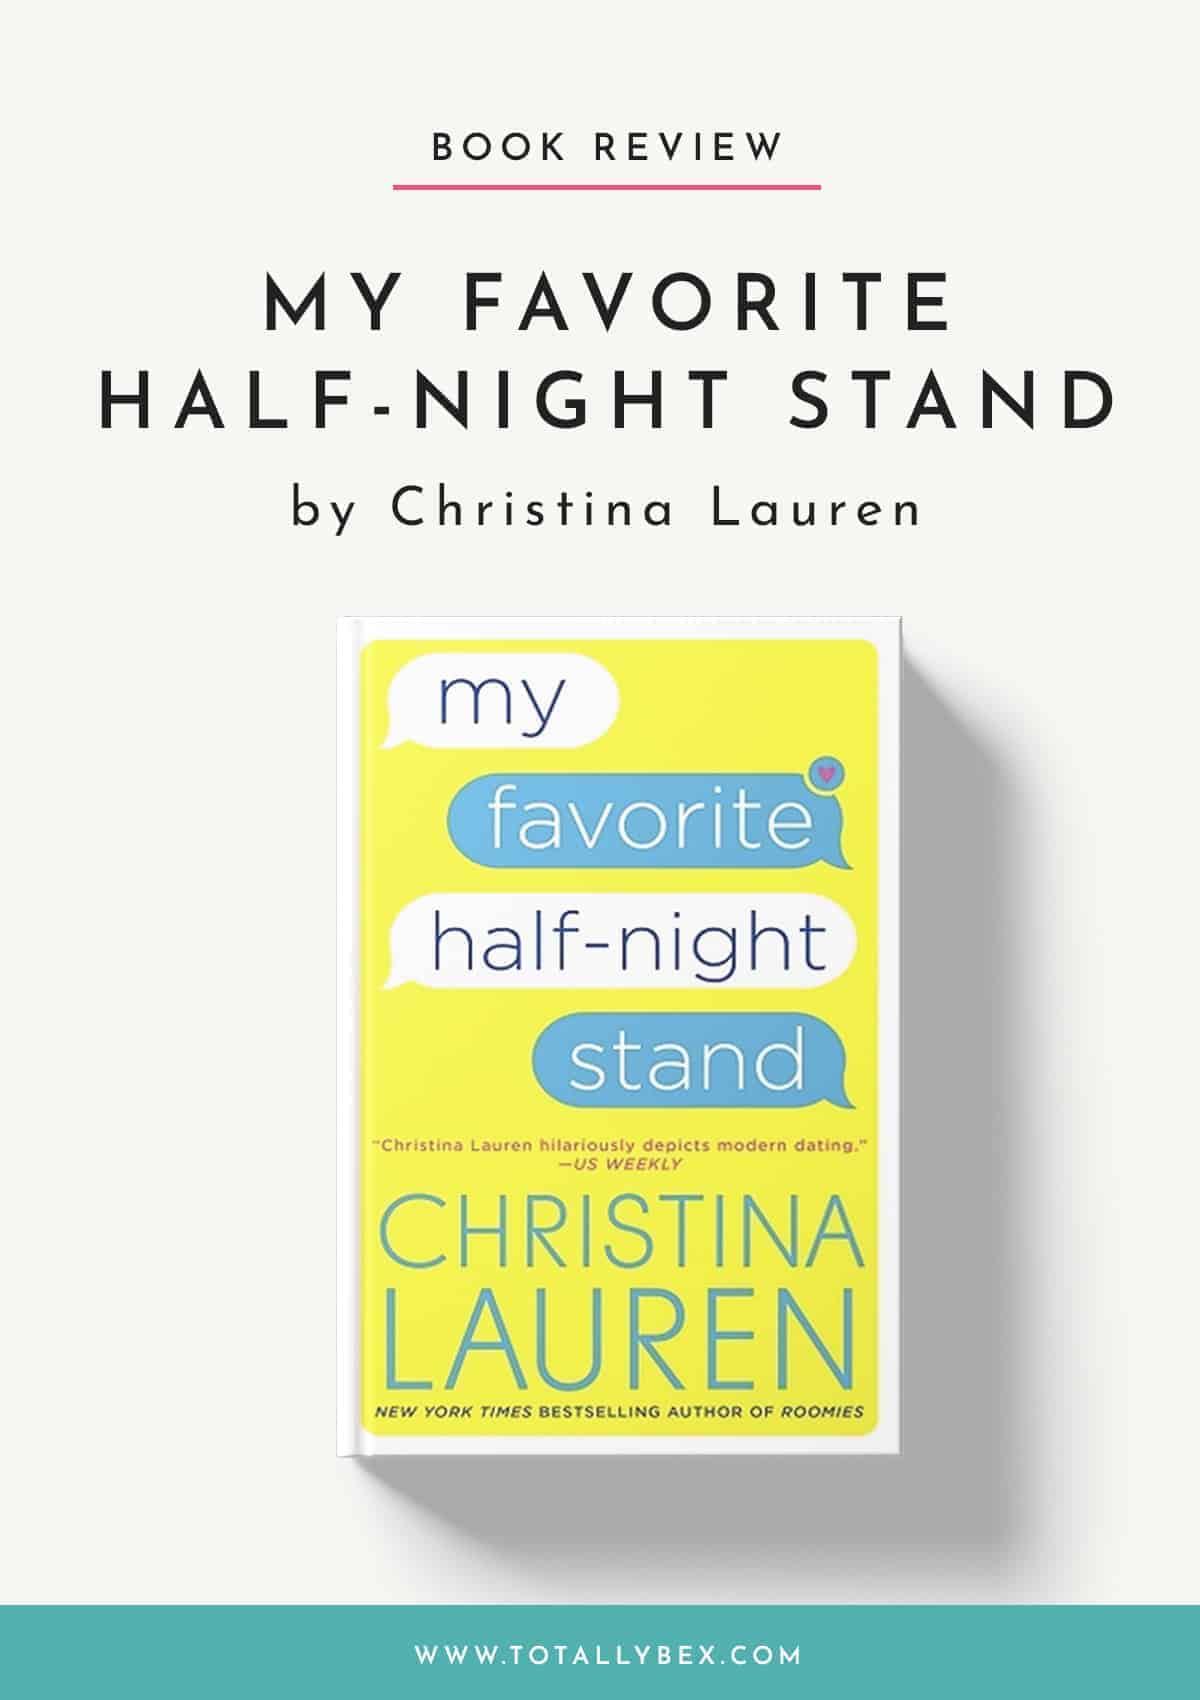 My Favorite Half-Night Stand by Christina Lauren is a smartly written and quirky contemporary romance about the perils of online dating while being in love with your best friend.